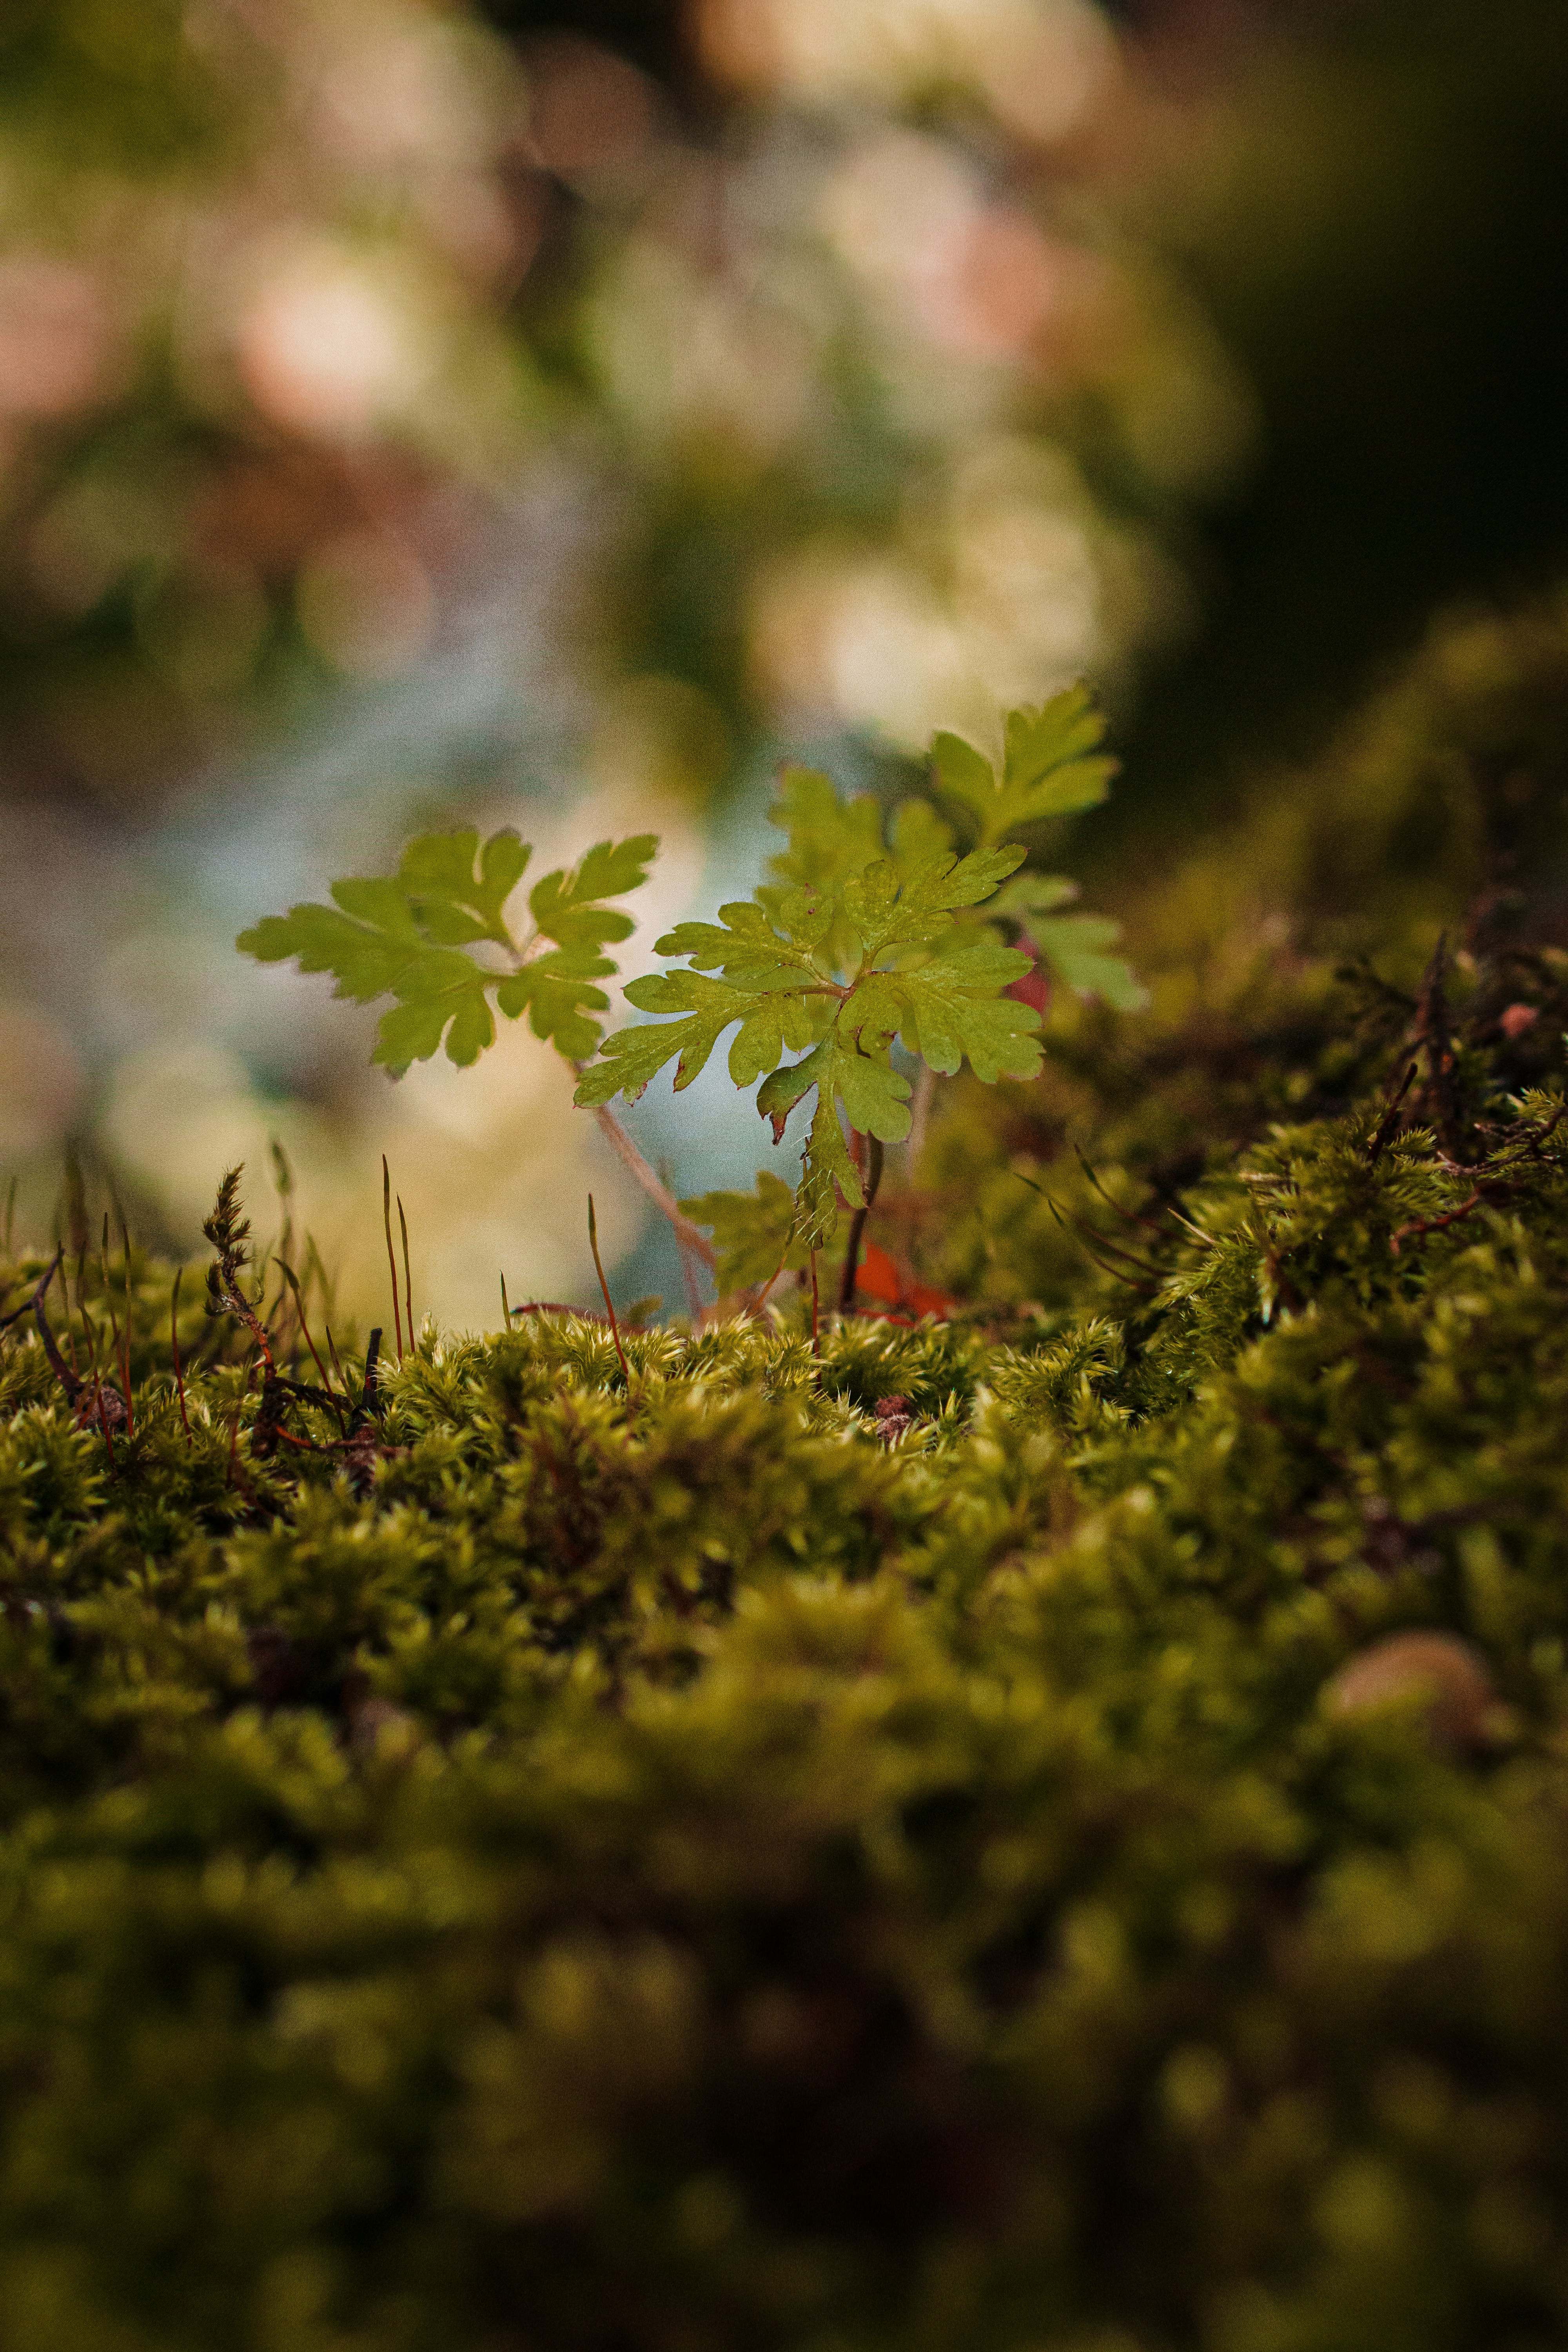 A close up of a plant sprouting from the moss.